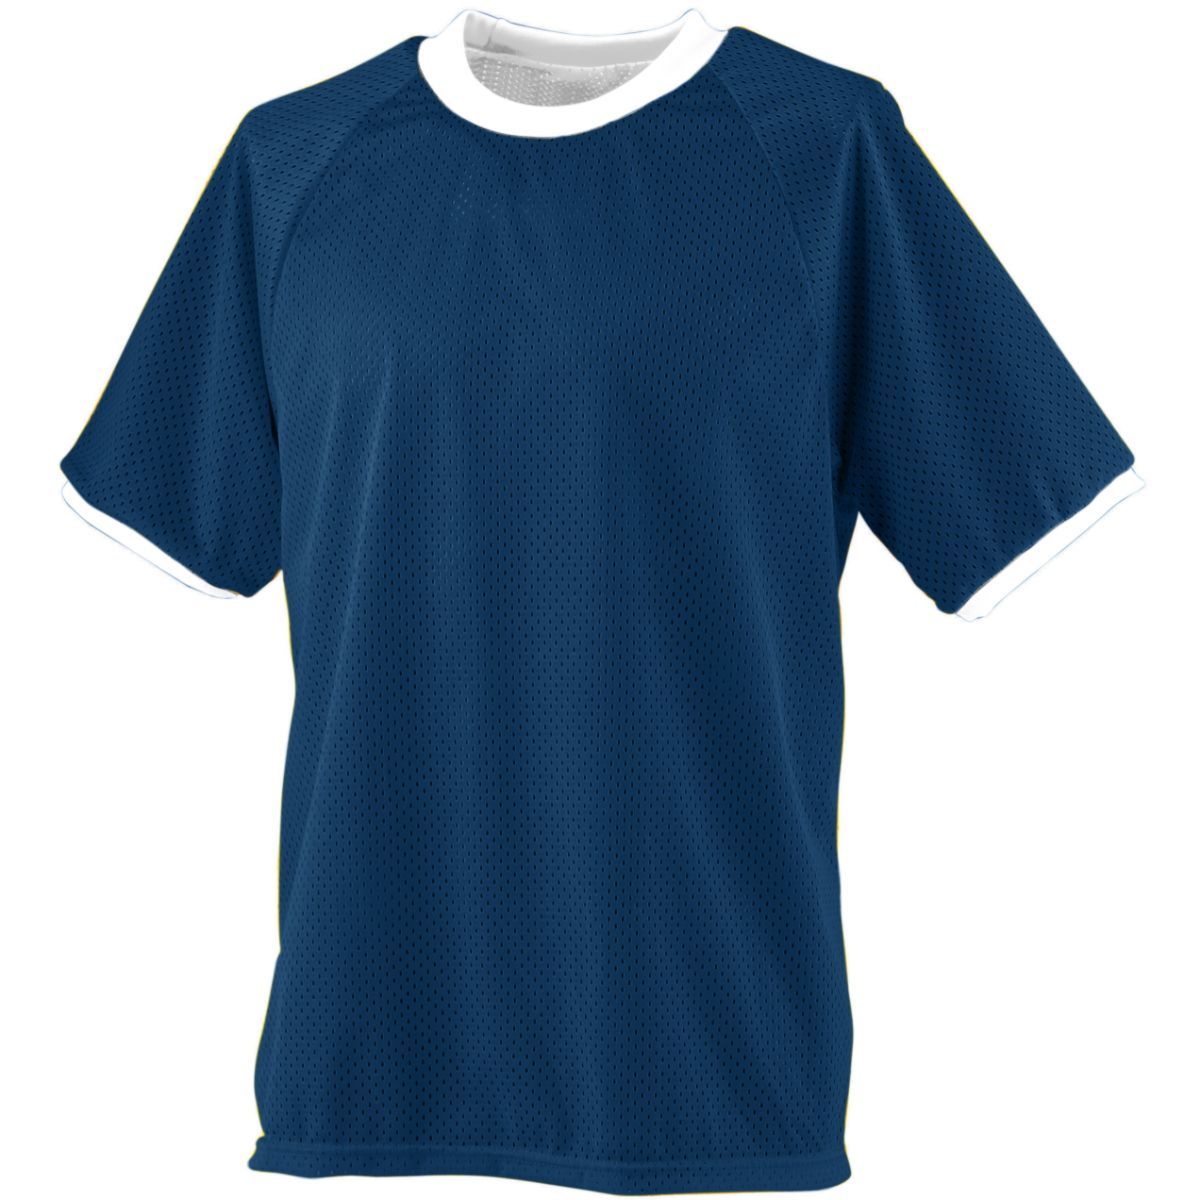 Augusta Sportswear Youth Reversible Practice Jersey in Navy/White  -Part of the Youth, Youth-Jersey, Augusta-Products, Soccer, Shirts, All-Sports-1 product lines at KanaleyCreations.com